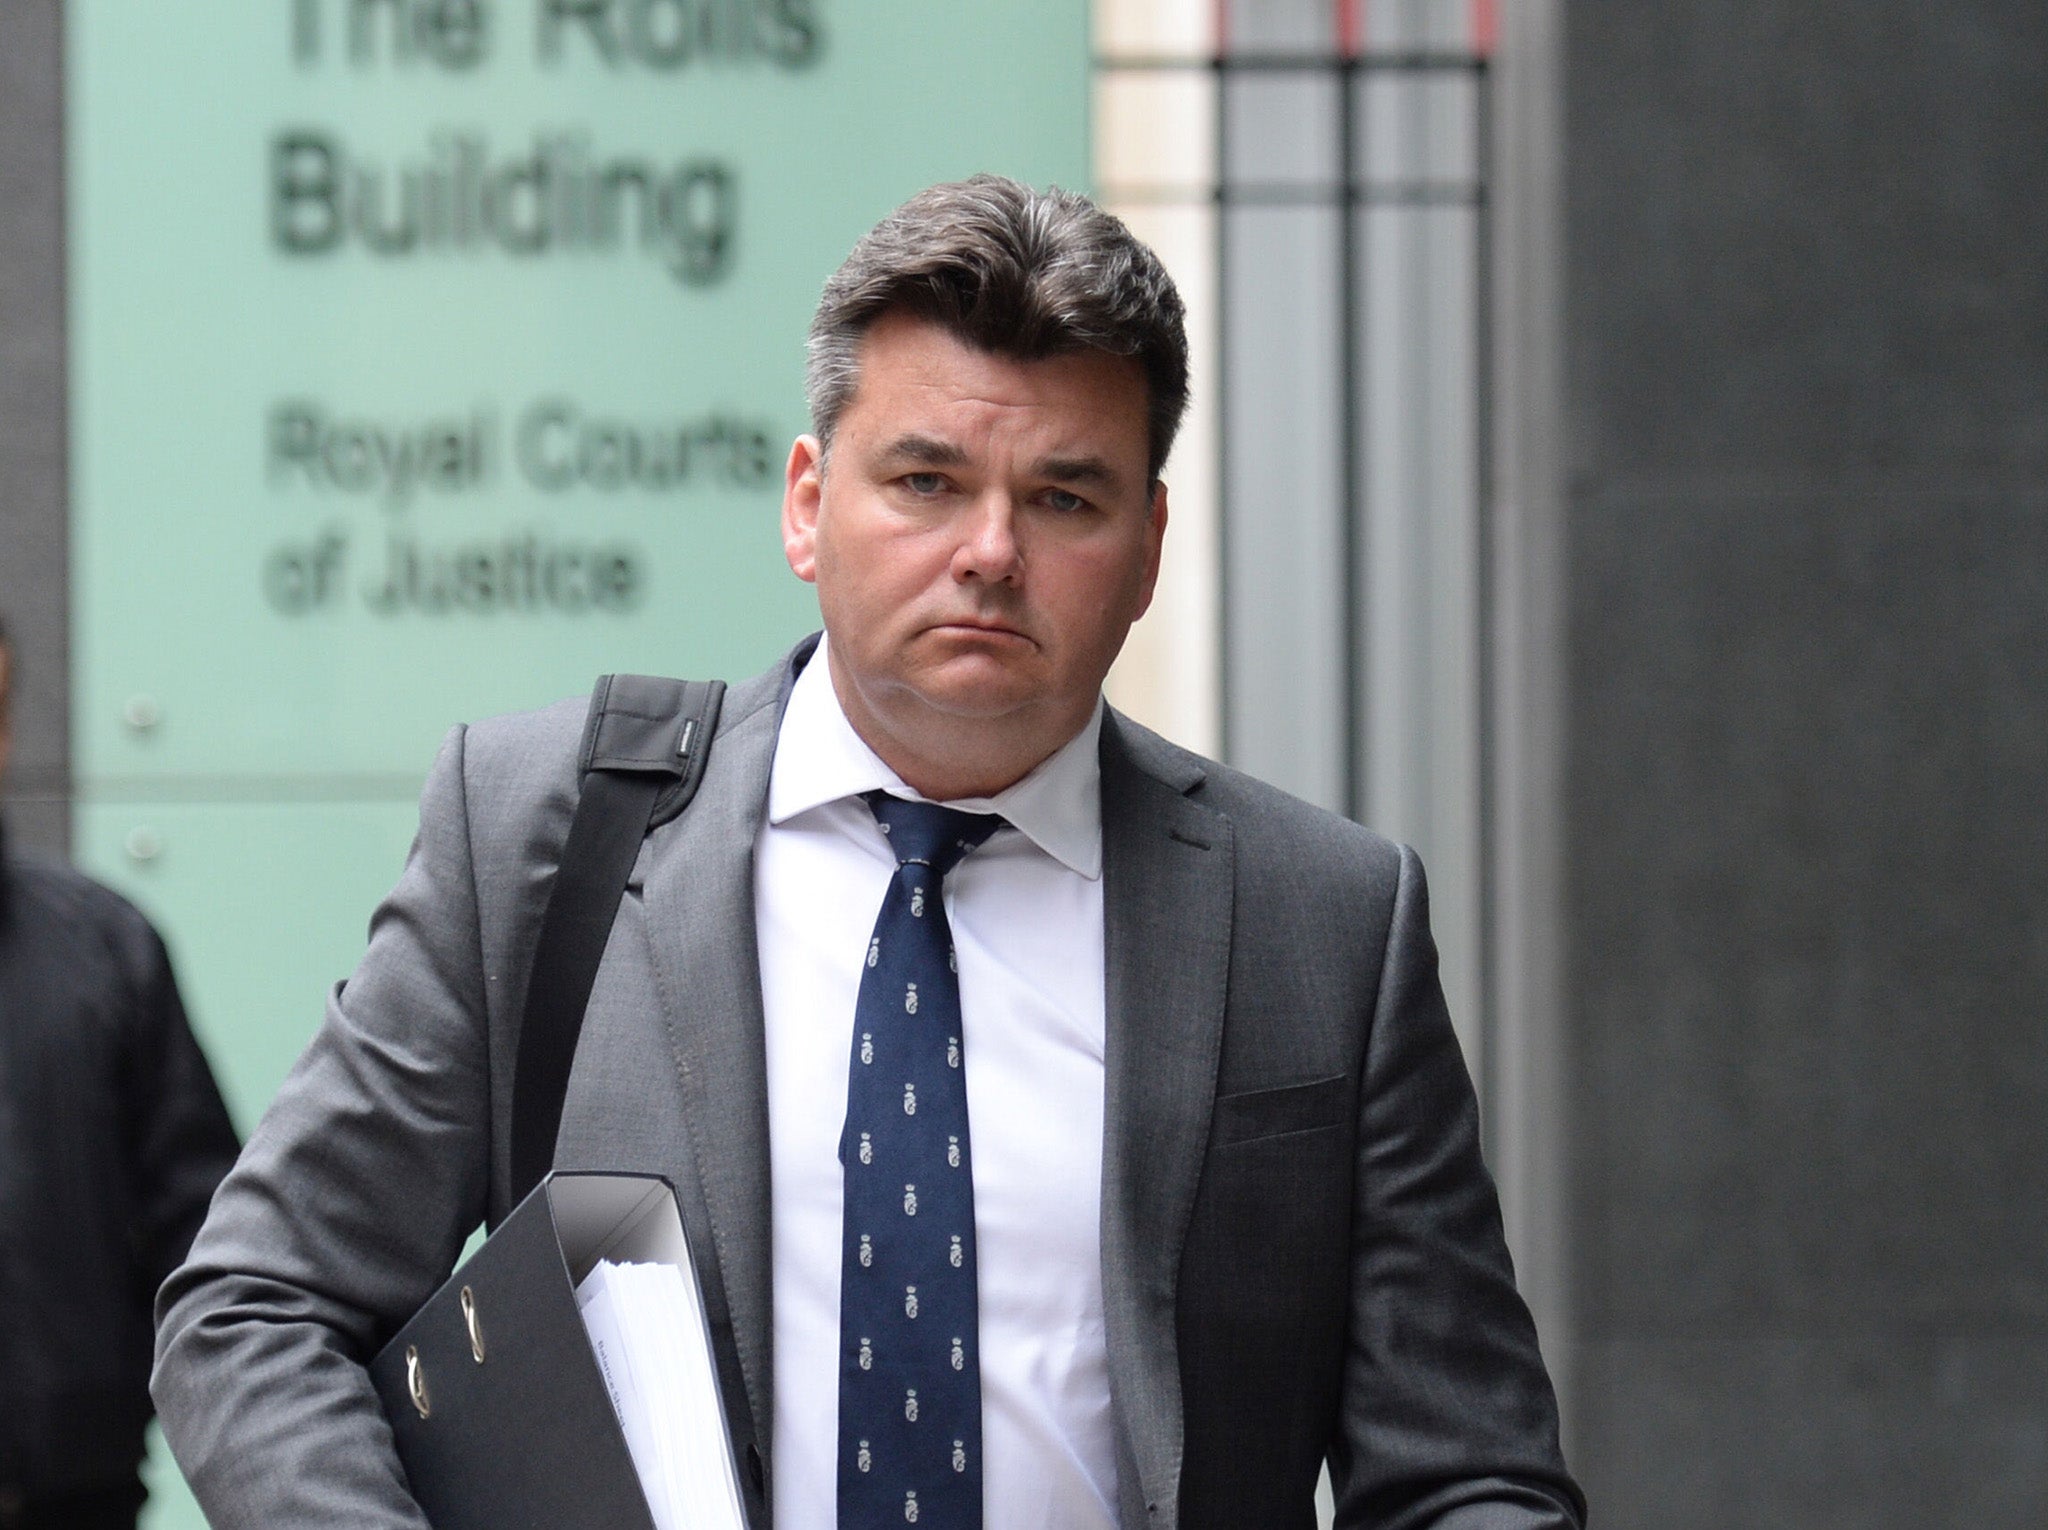 Dominic Chappell bought BHS for £1 in 2015